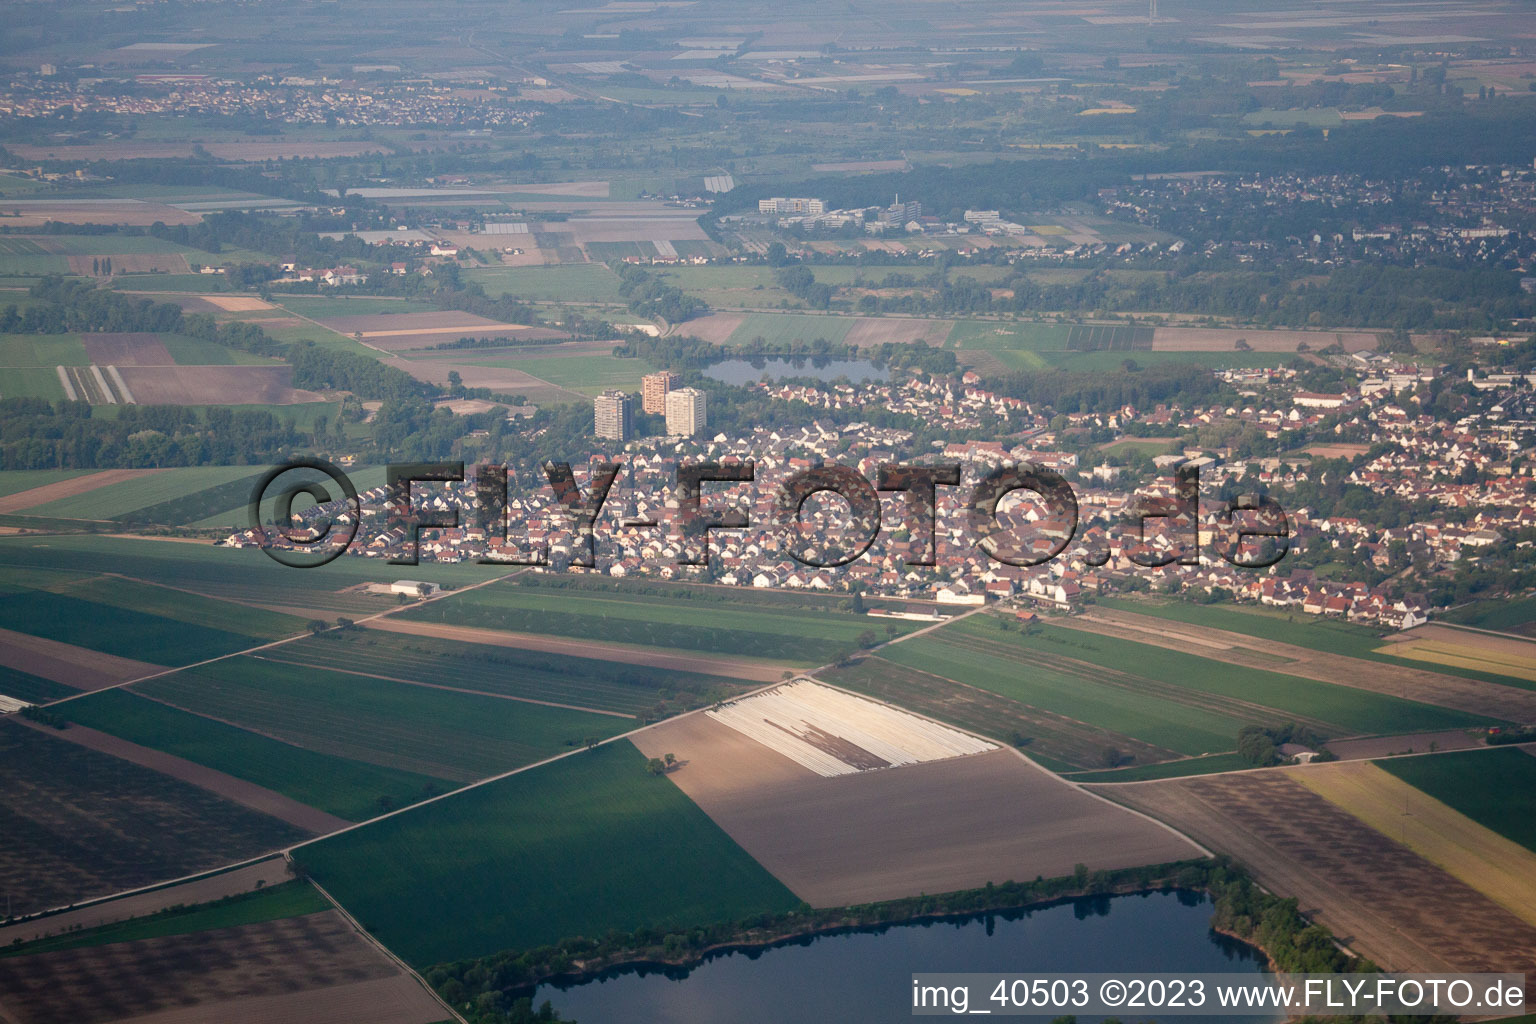 Altrip in the state Rhineland-Palatinate, Germany seen from a drone